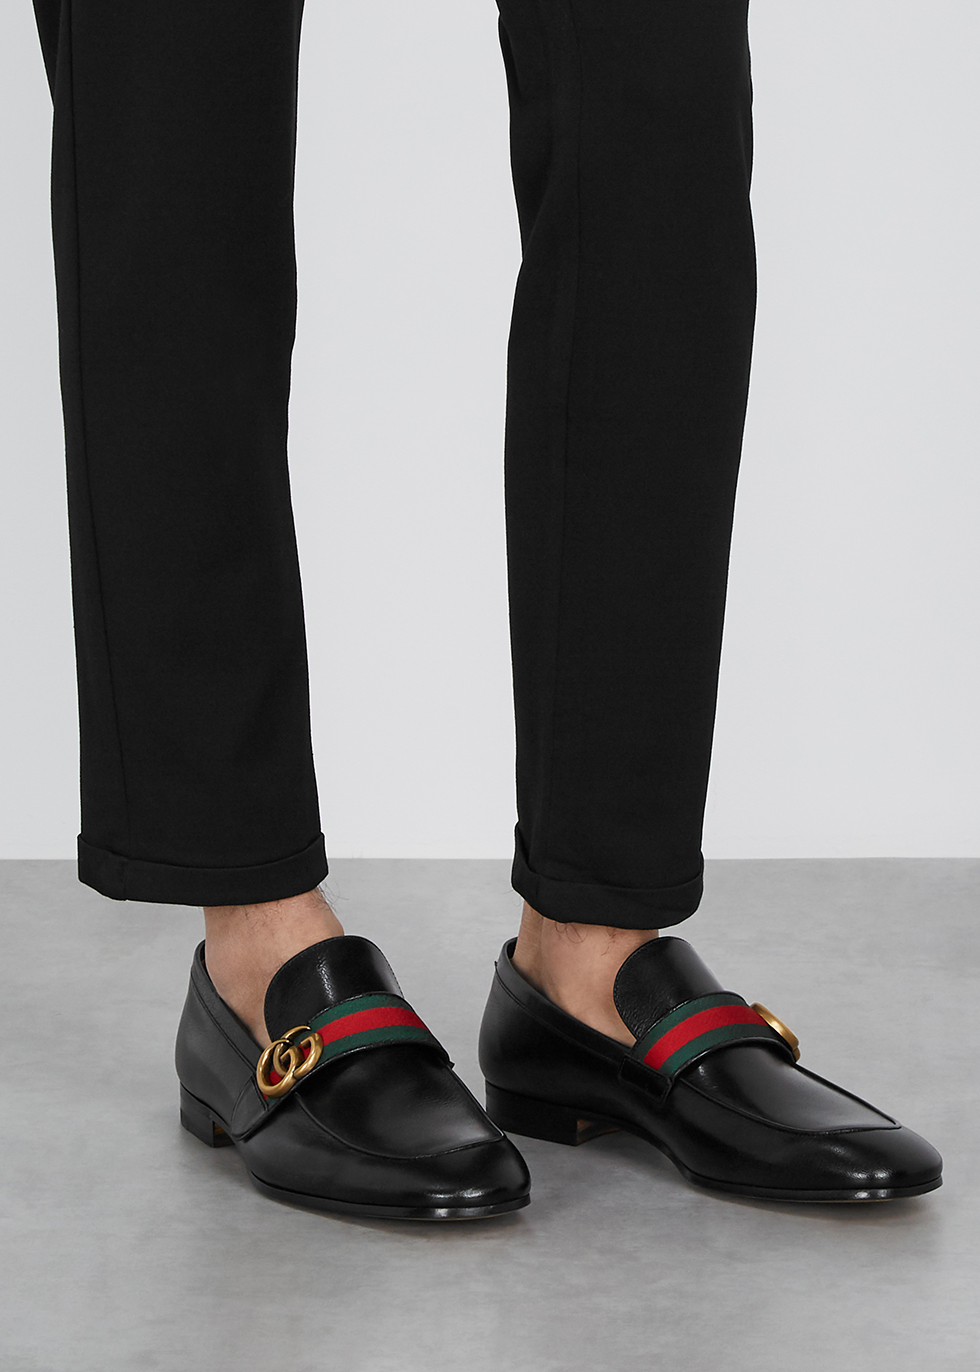 gucci loafers black leather